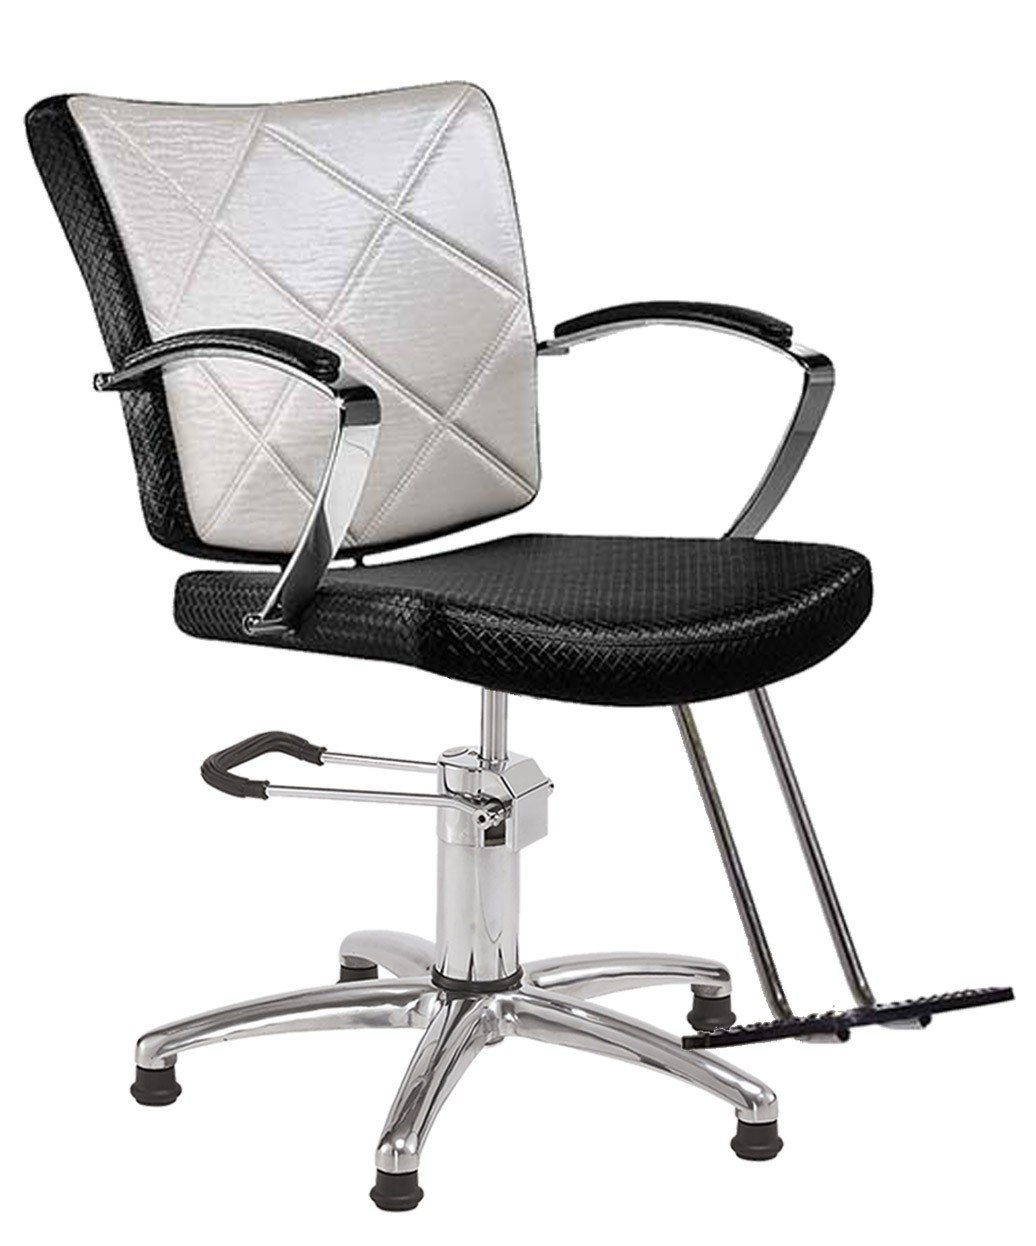 Salon Ambience SH-165 Julie Styling Chair